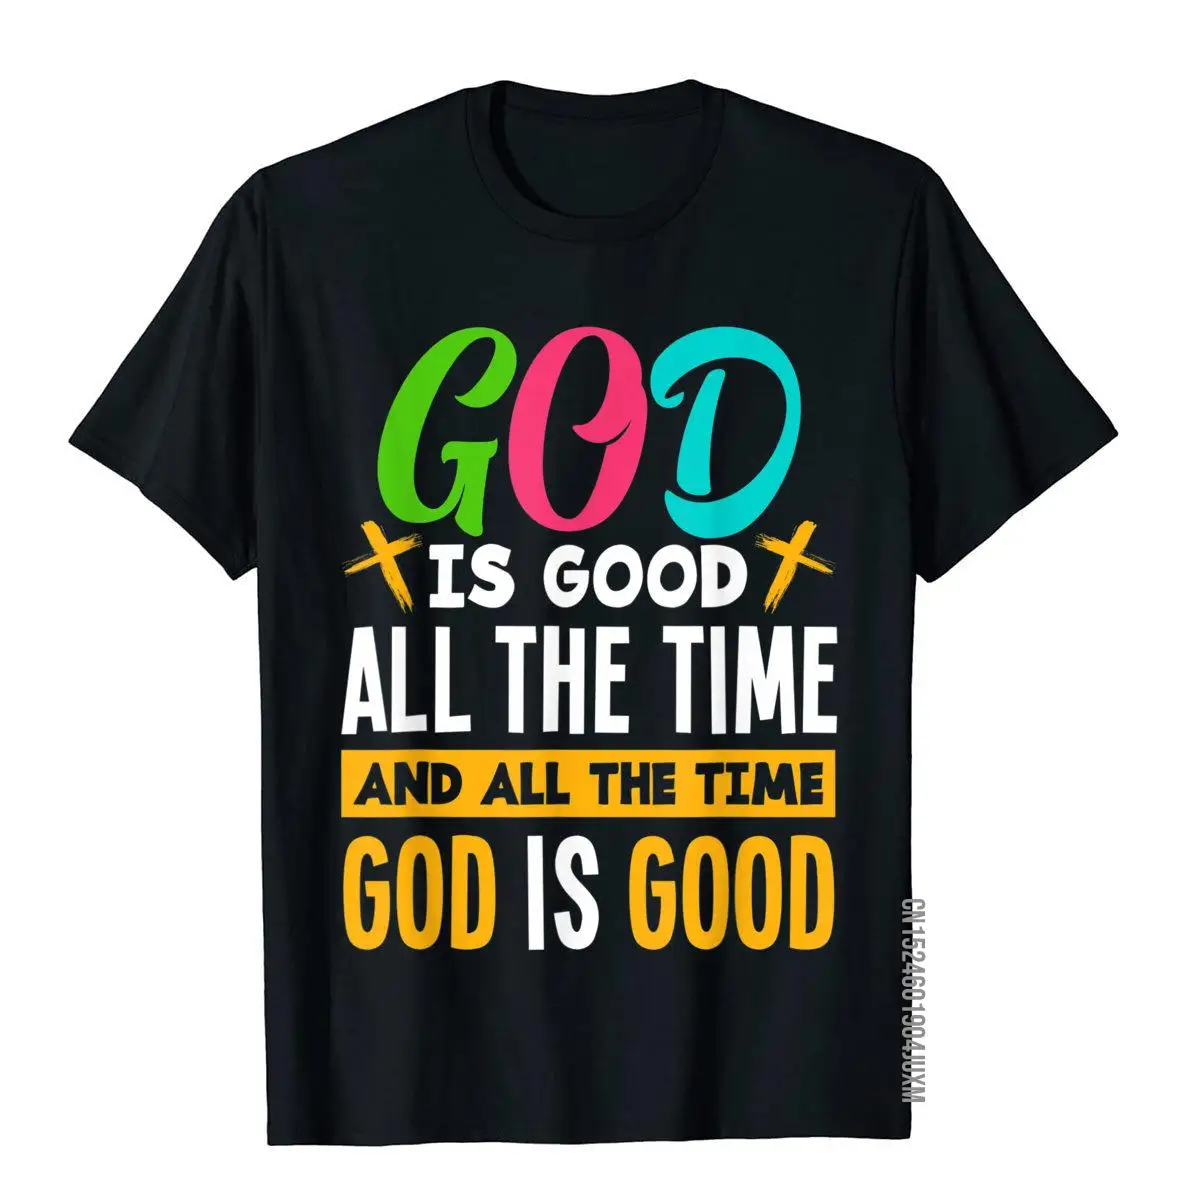 God Is Good All The Time Jesus Christ Christian Gift T-Shirt__97A3448black